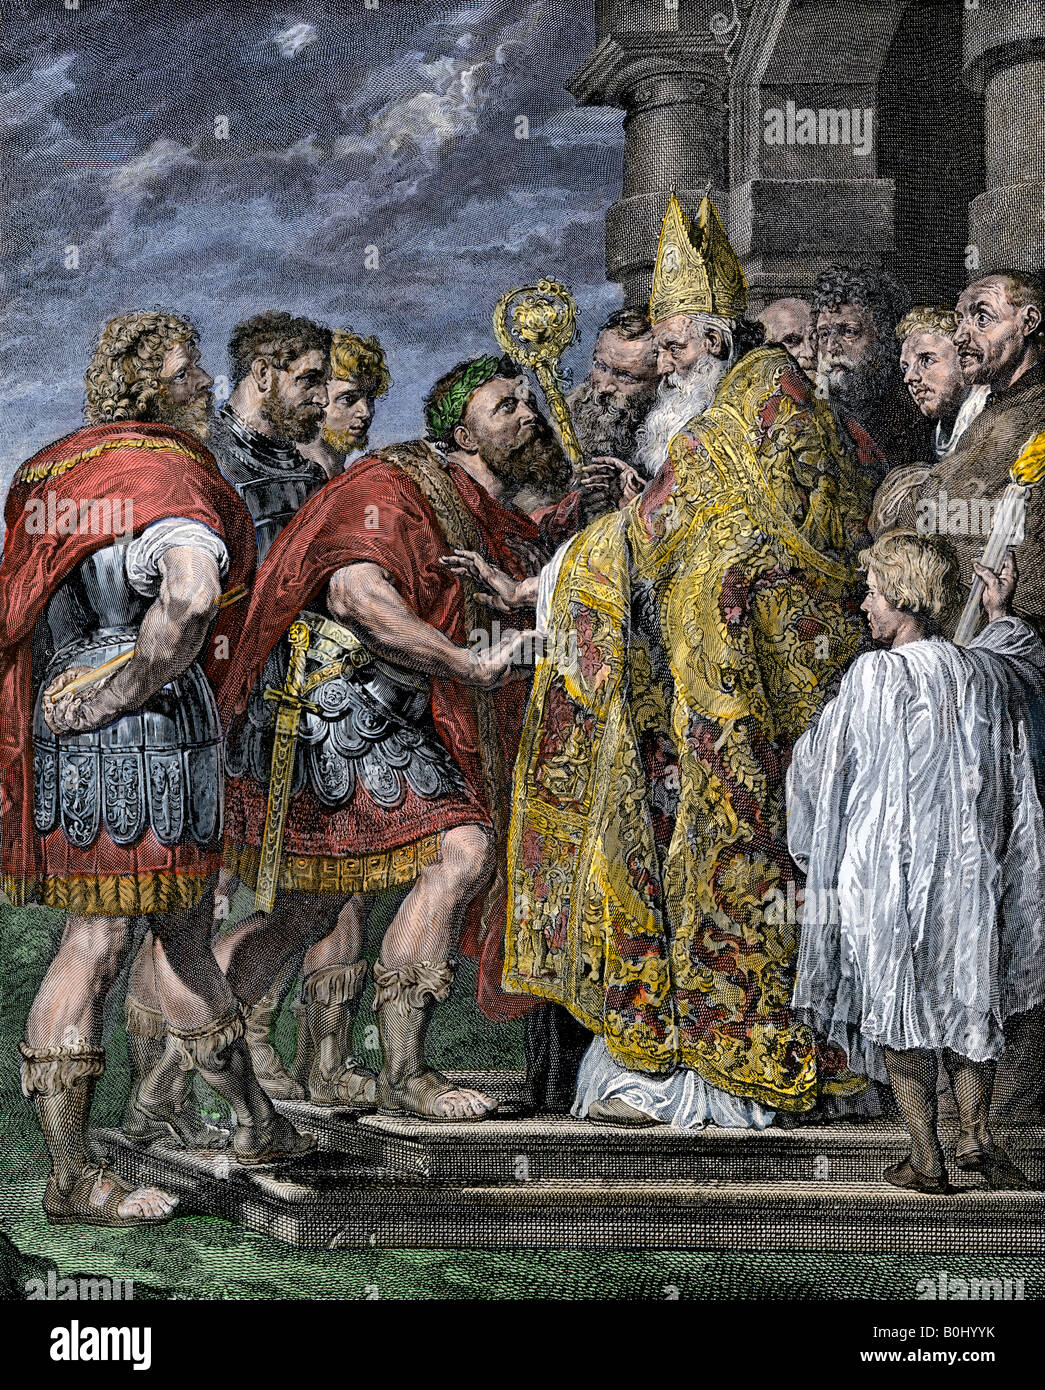 Bishop Ambrose rebukes Roman Emperor Theodosius I for atrocities in Thessalonica. Hand-colored woodcut Stock Photo